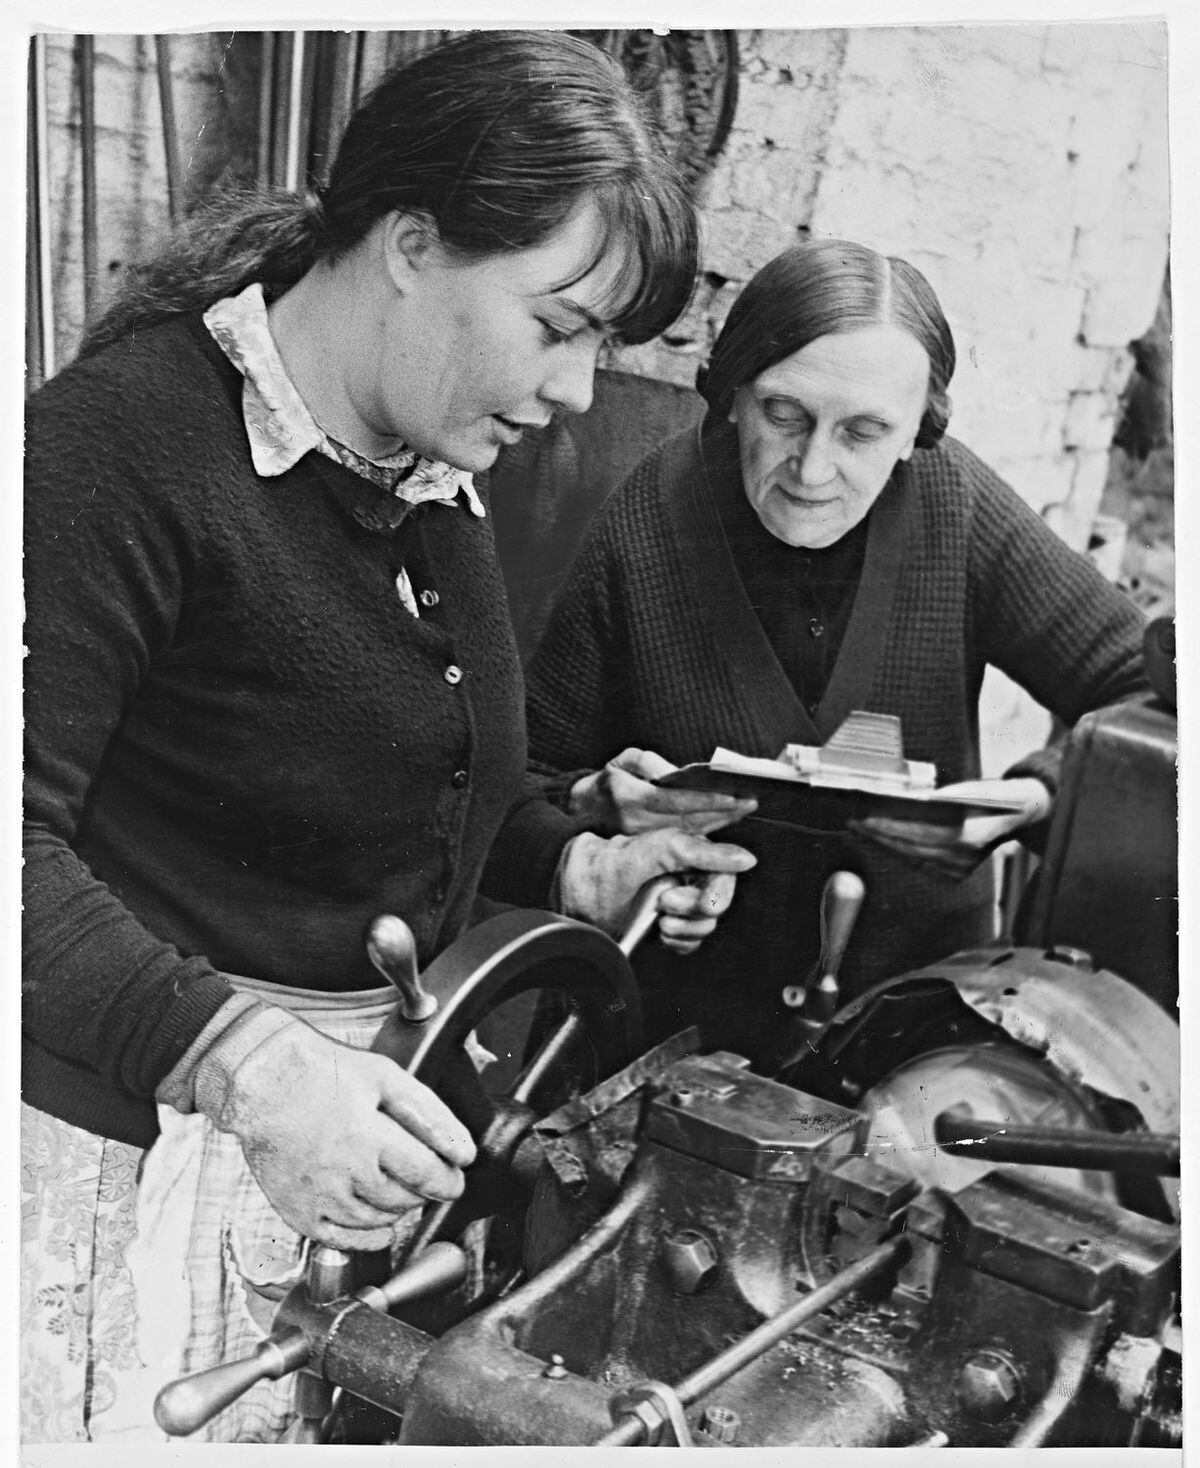 July 22, 1970: Family blacksmiths, Joseph Wyle & Co. in Blackheath was established in 1860. Photograph shows Ellen Beese teaching her daughter Elizabeth as the firm adapted to 20th century techniques – going metric.